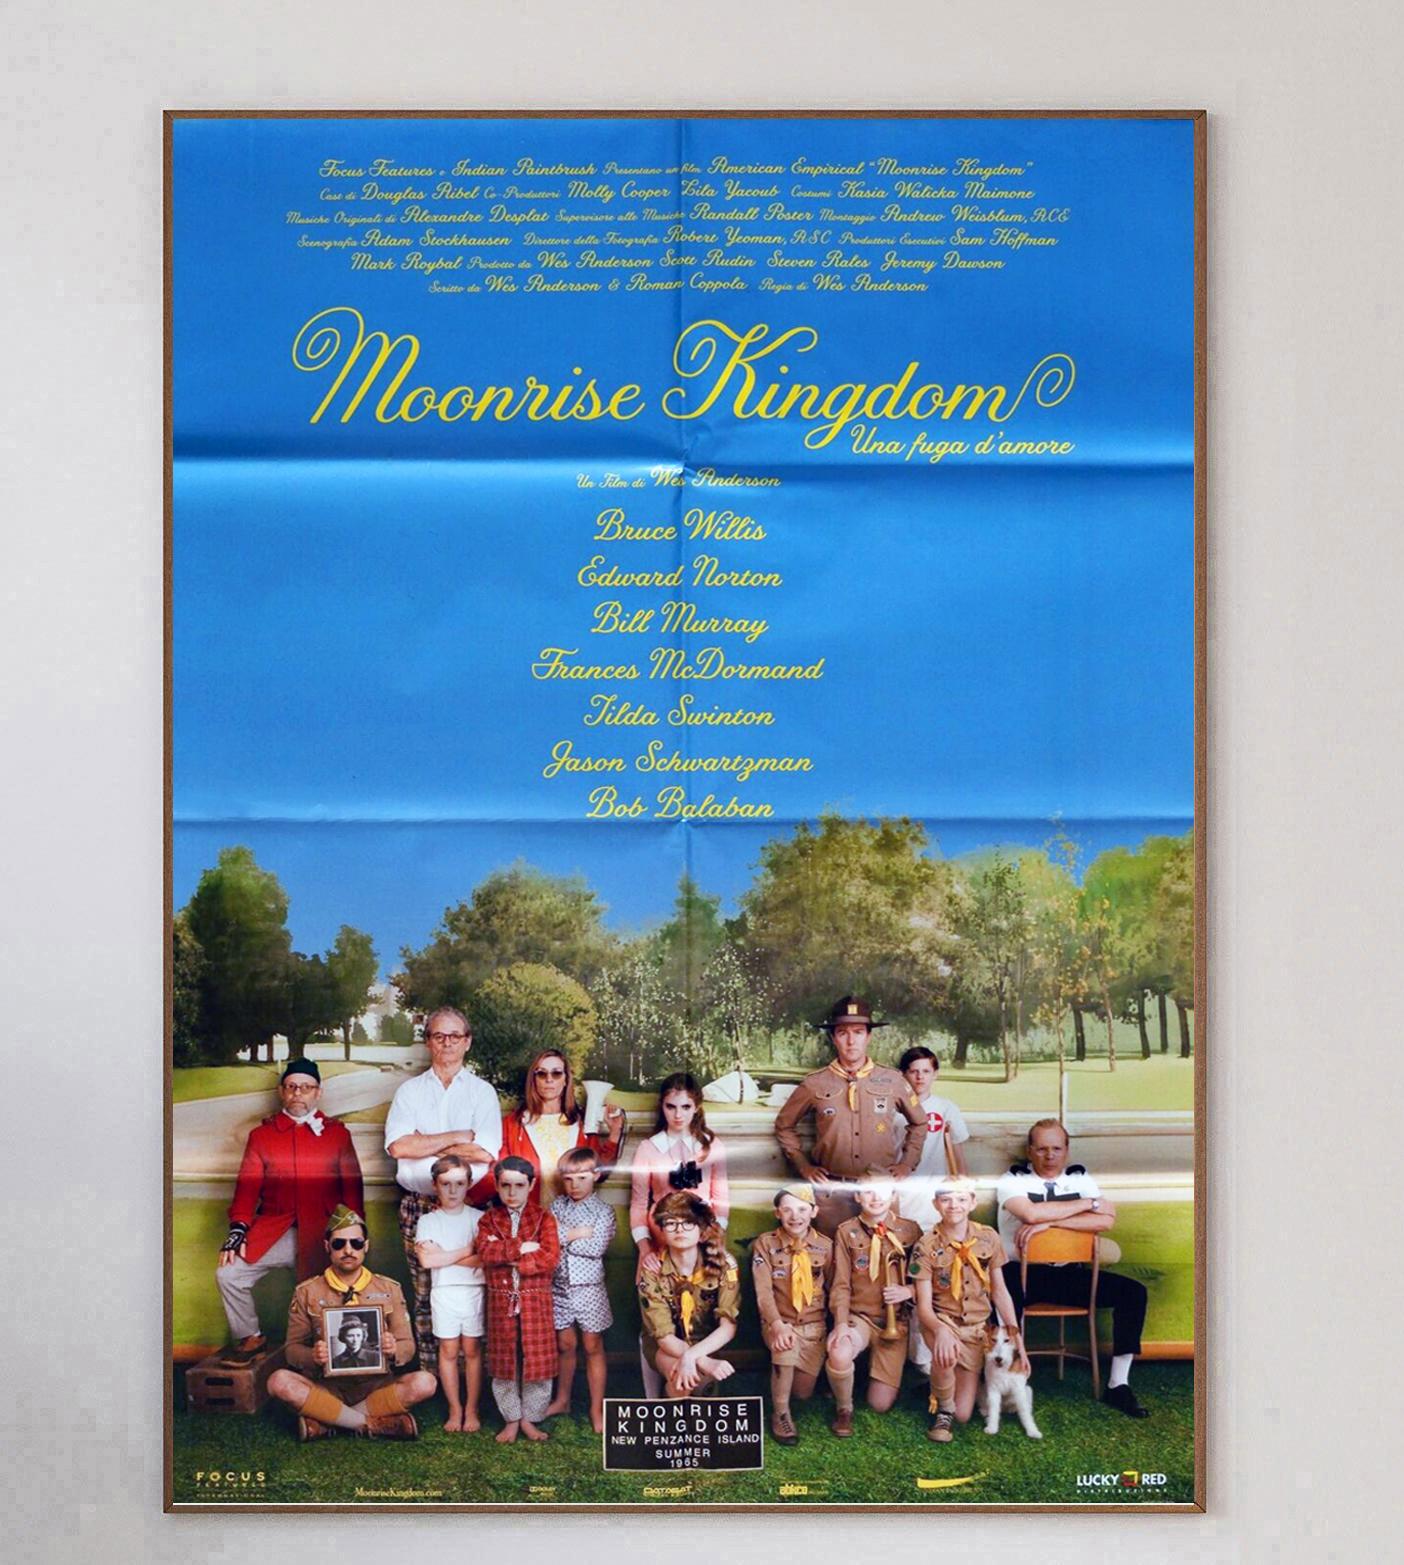 The imitable Wes Anderson released 